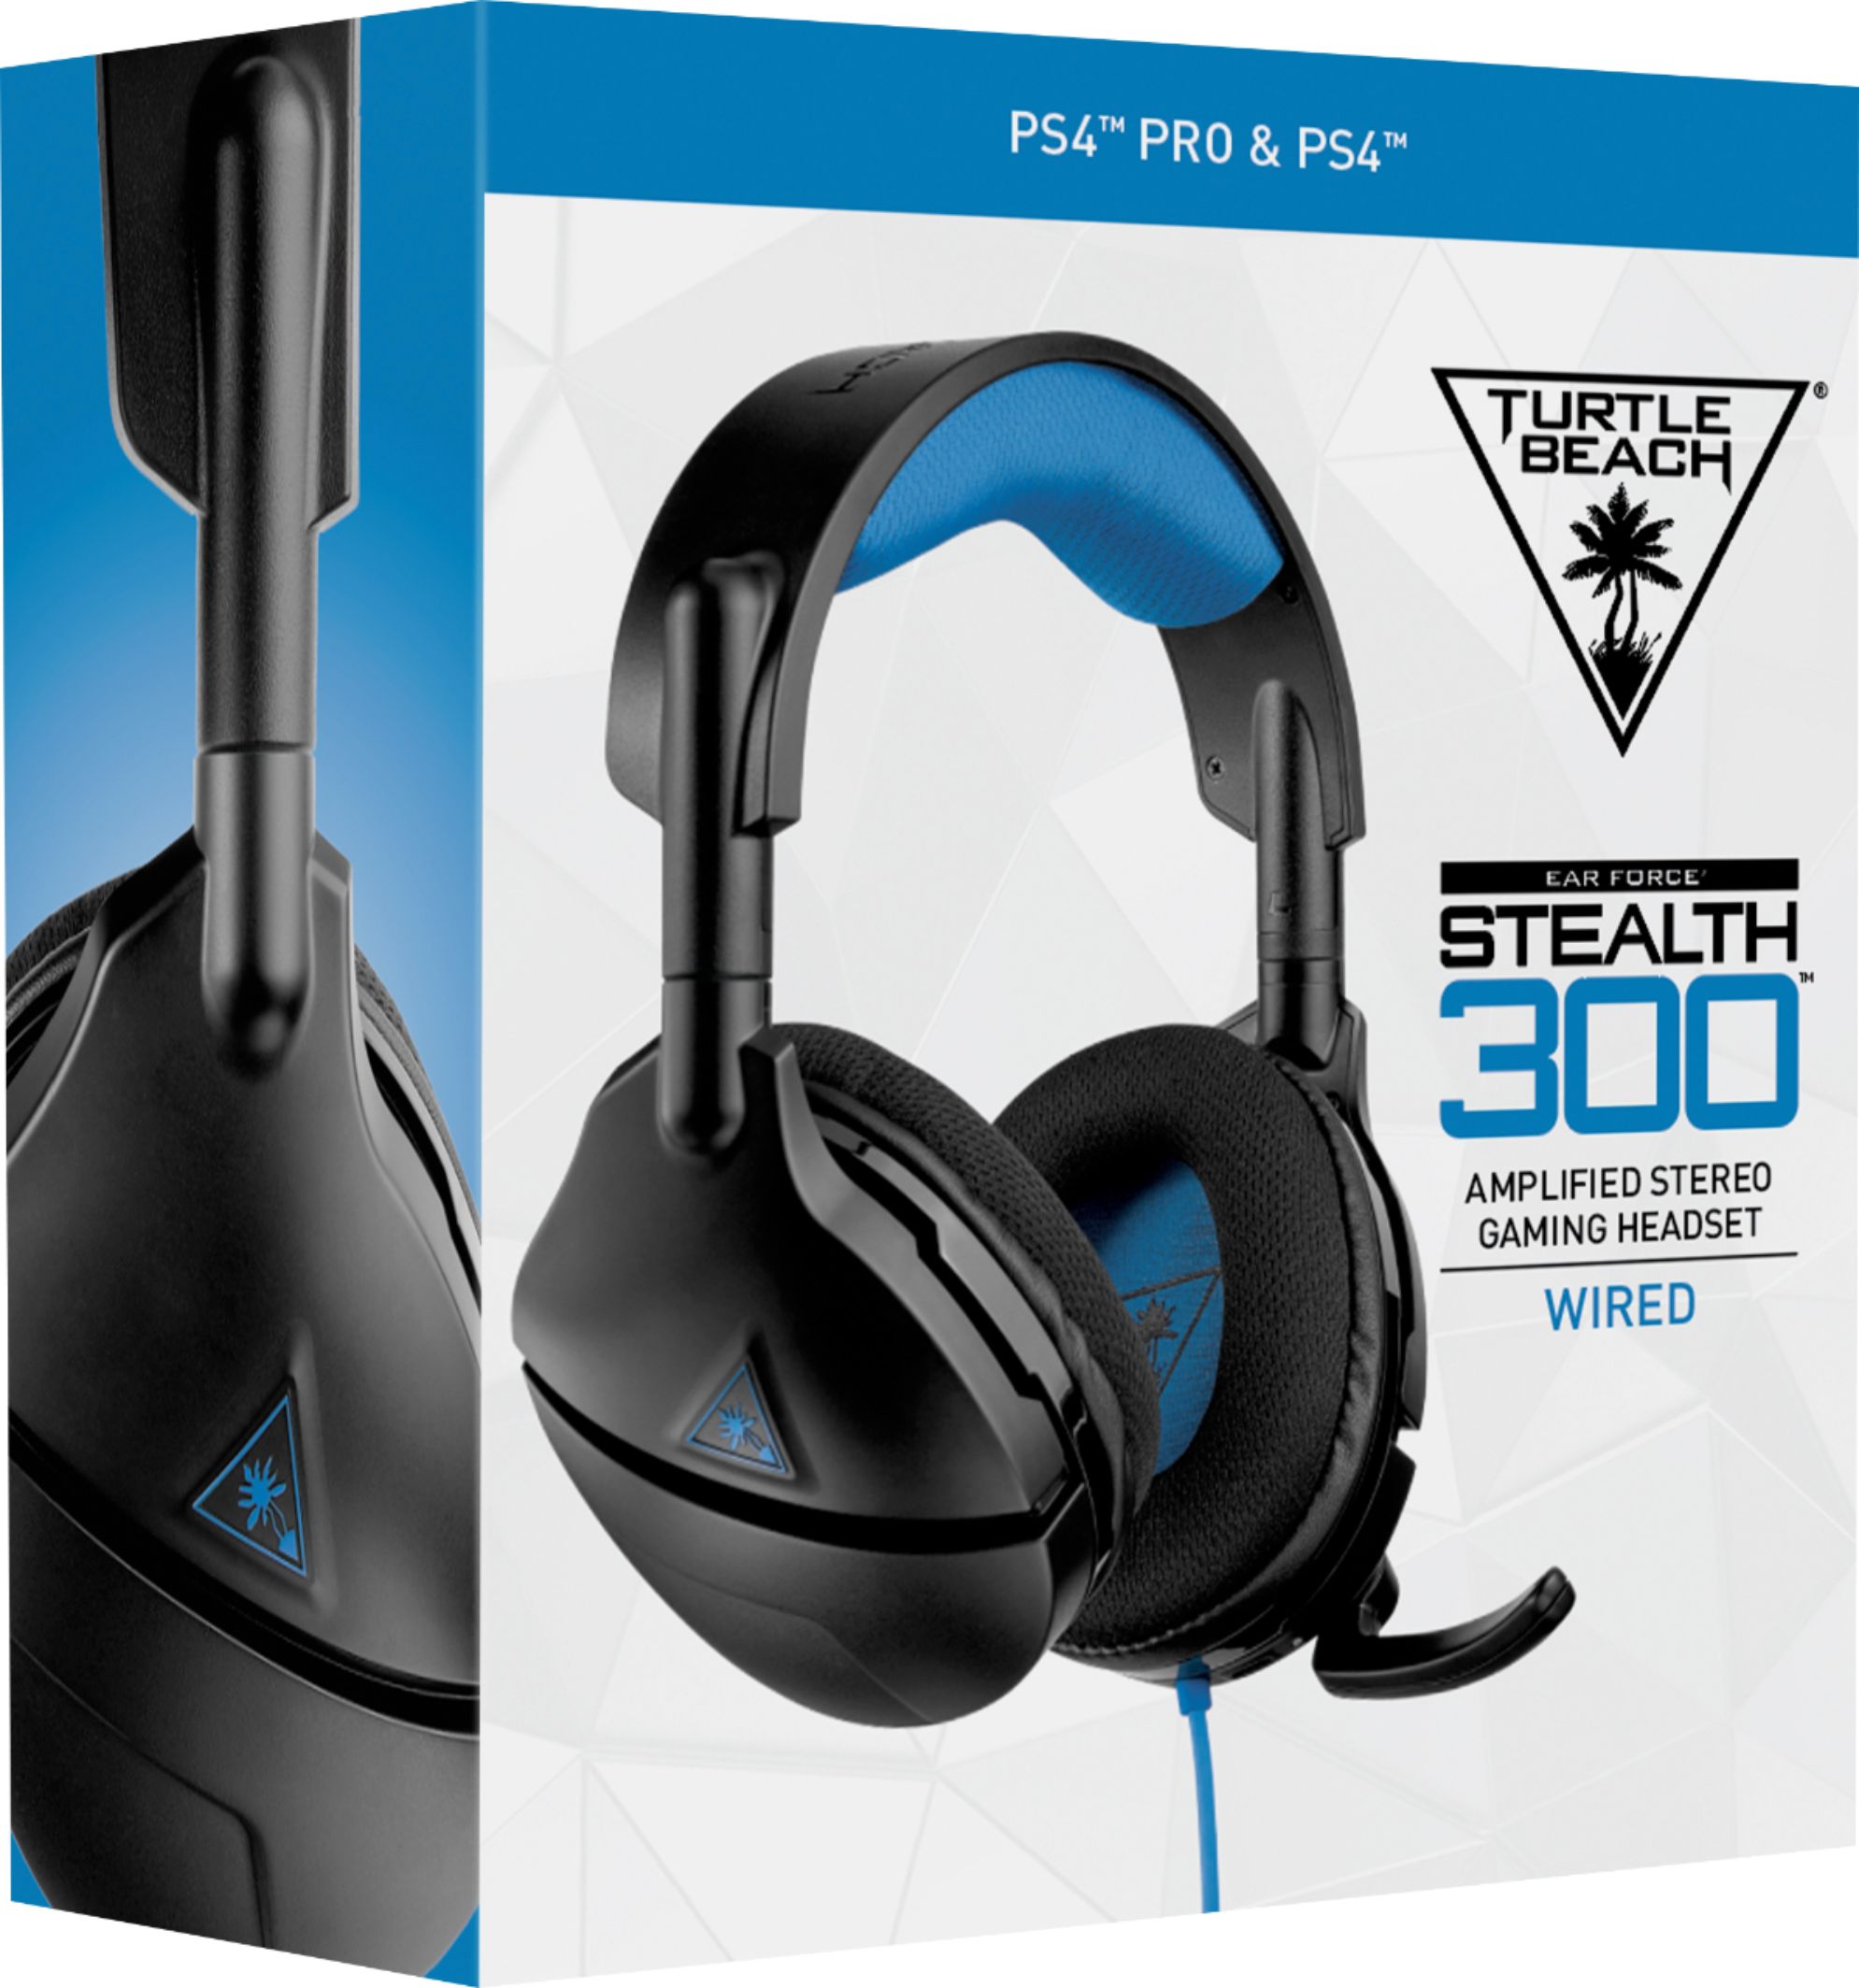 turtle beach playstation 4 gaming headset with microphone